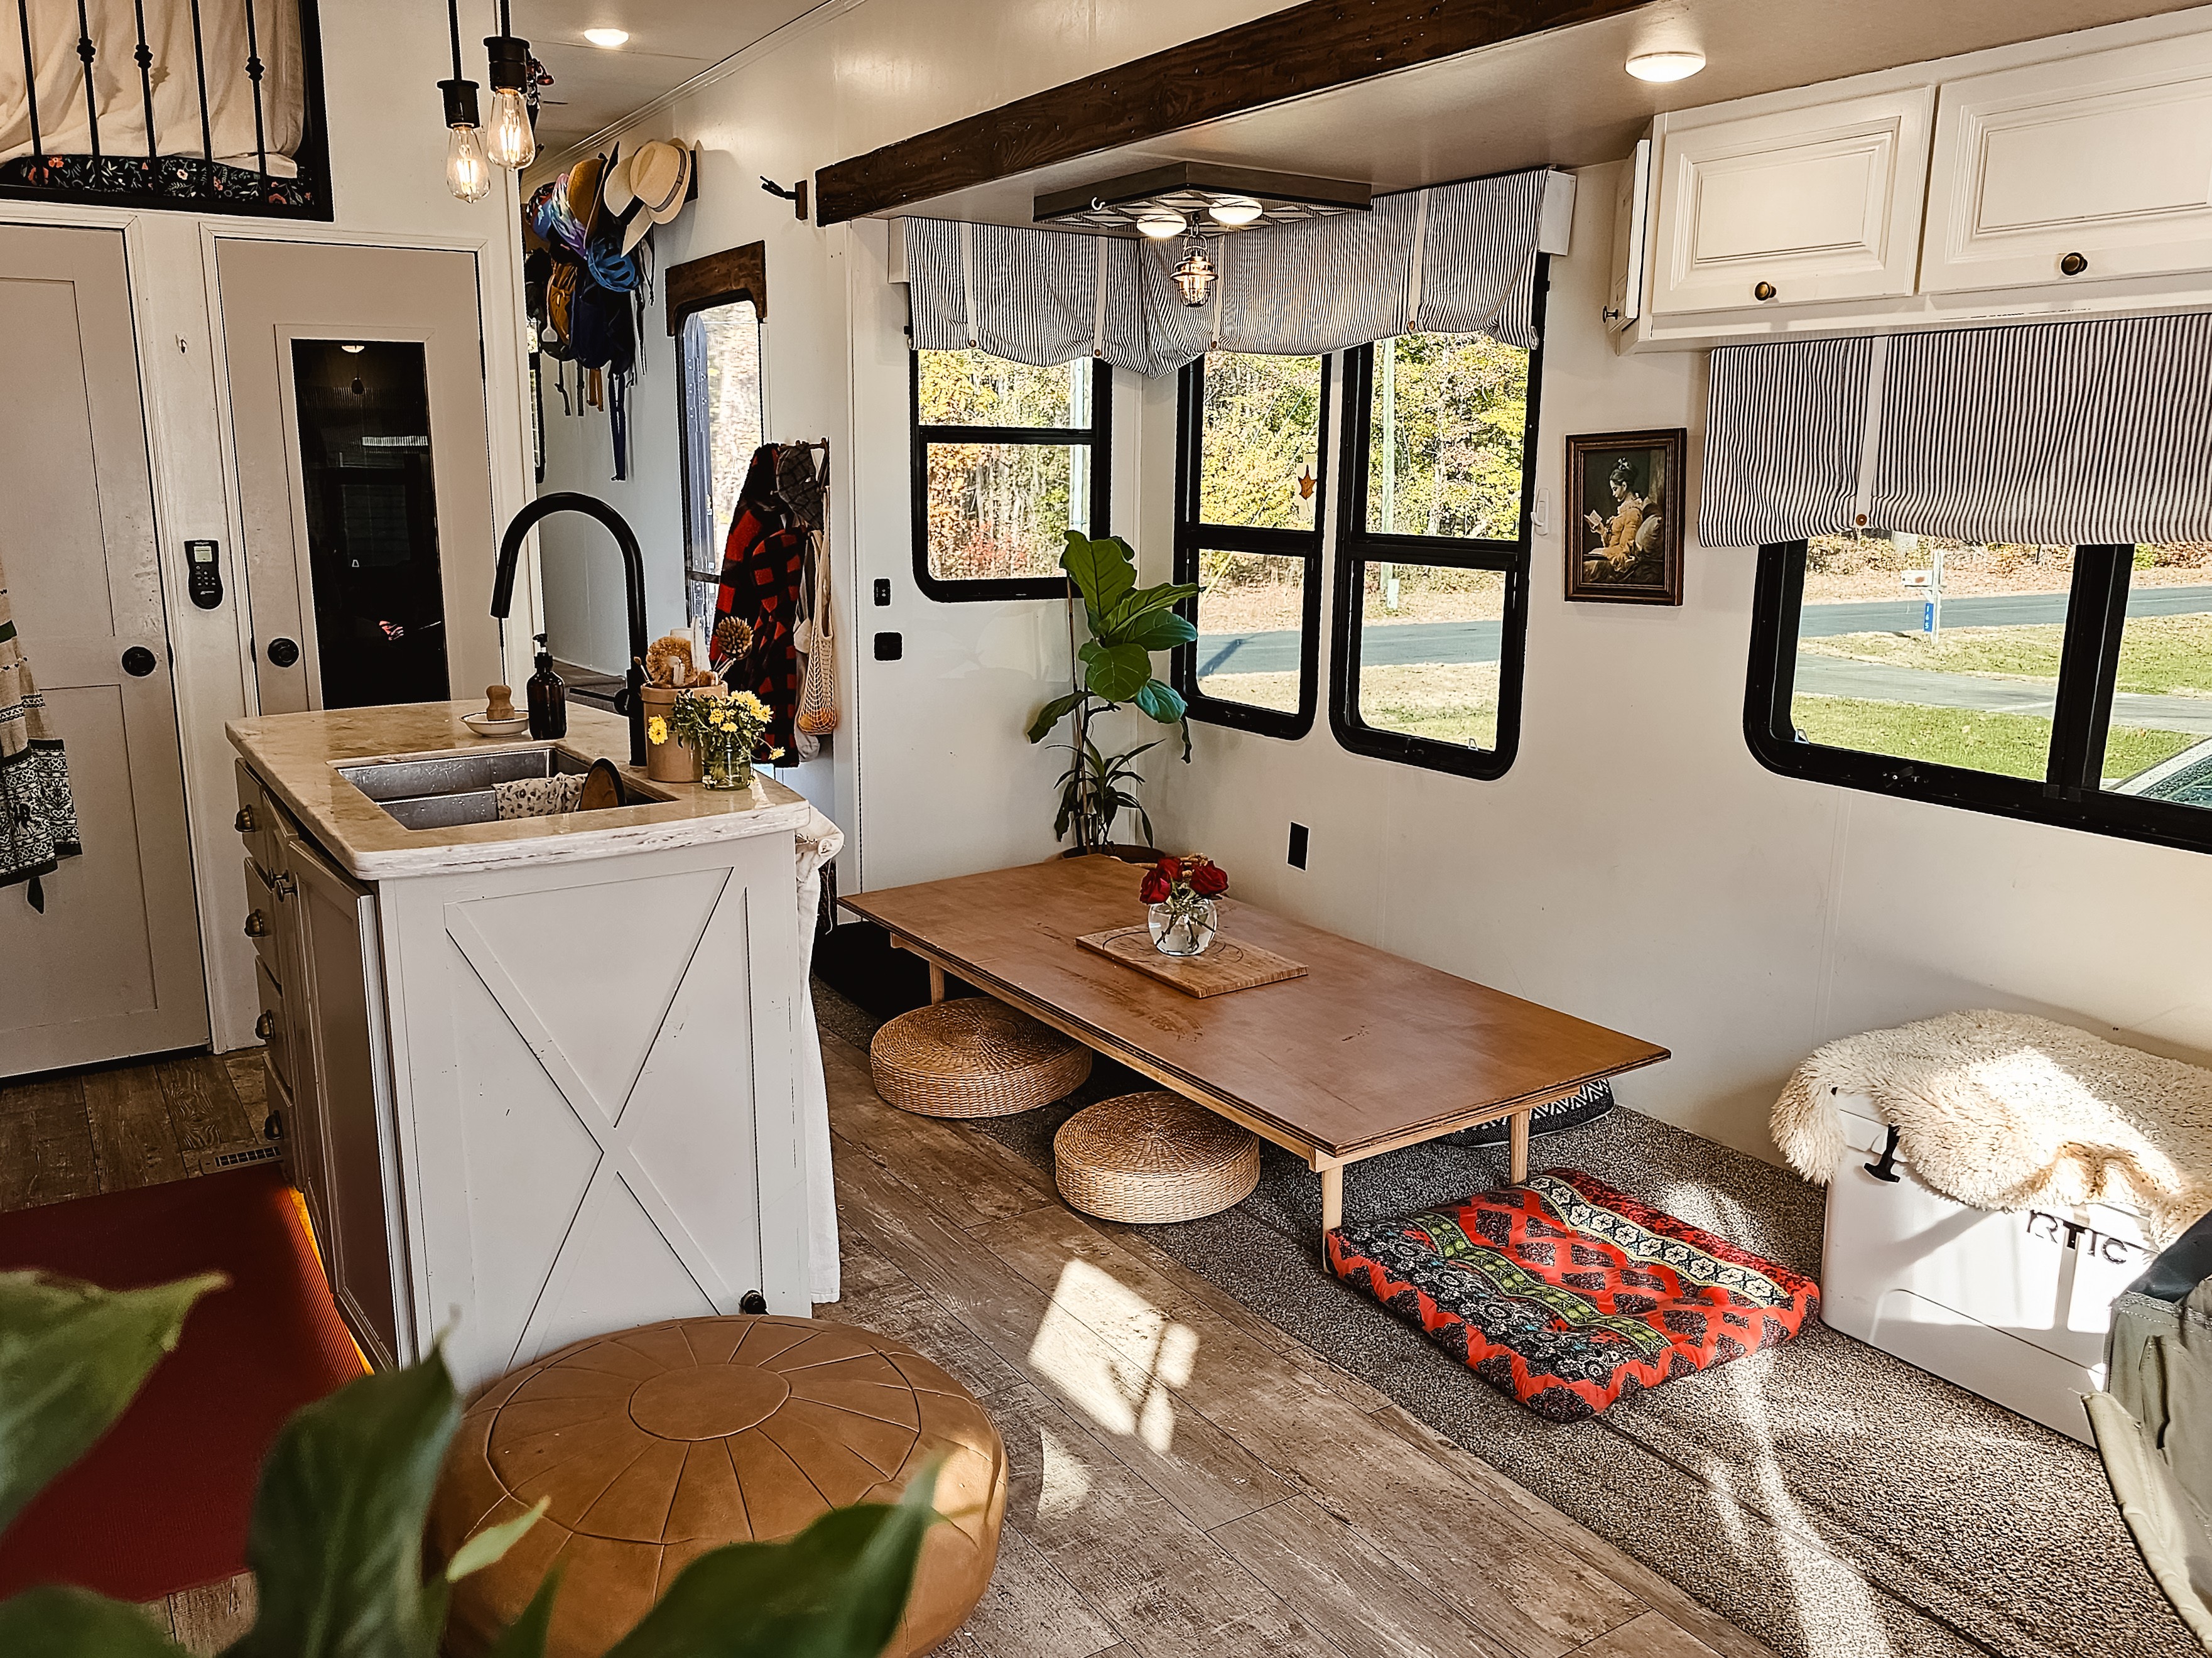 The kitchen and living room inside JC and Barbel (Bibi) Barringer's 2018 KZ Durango Gold fifth-wheel